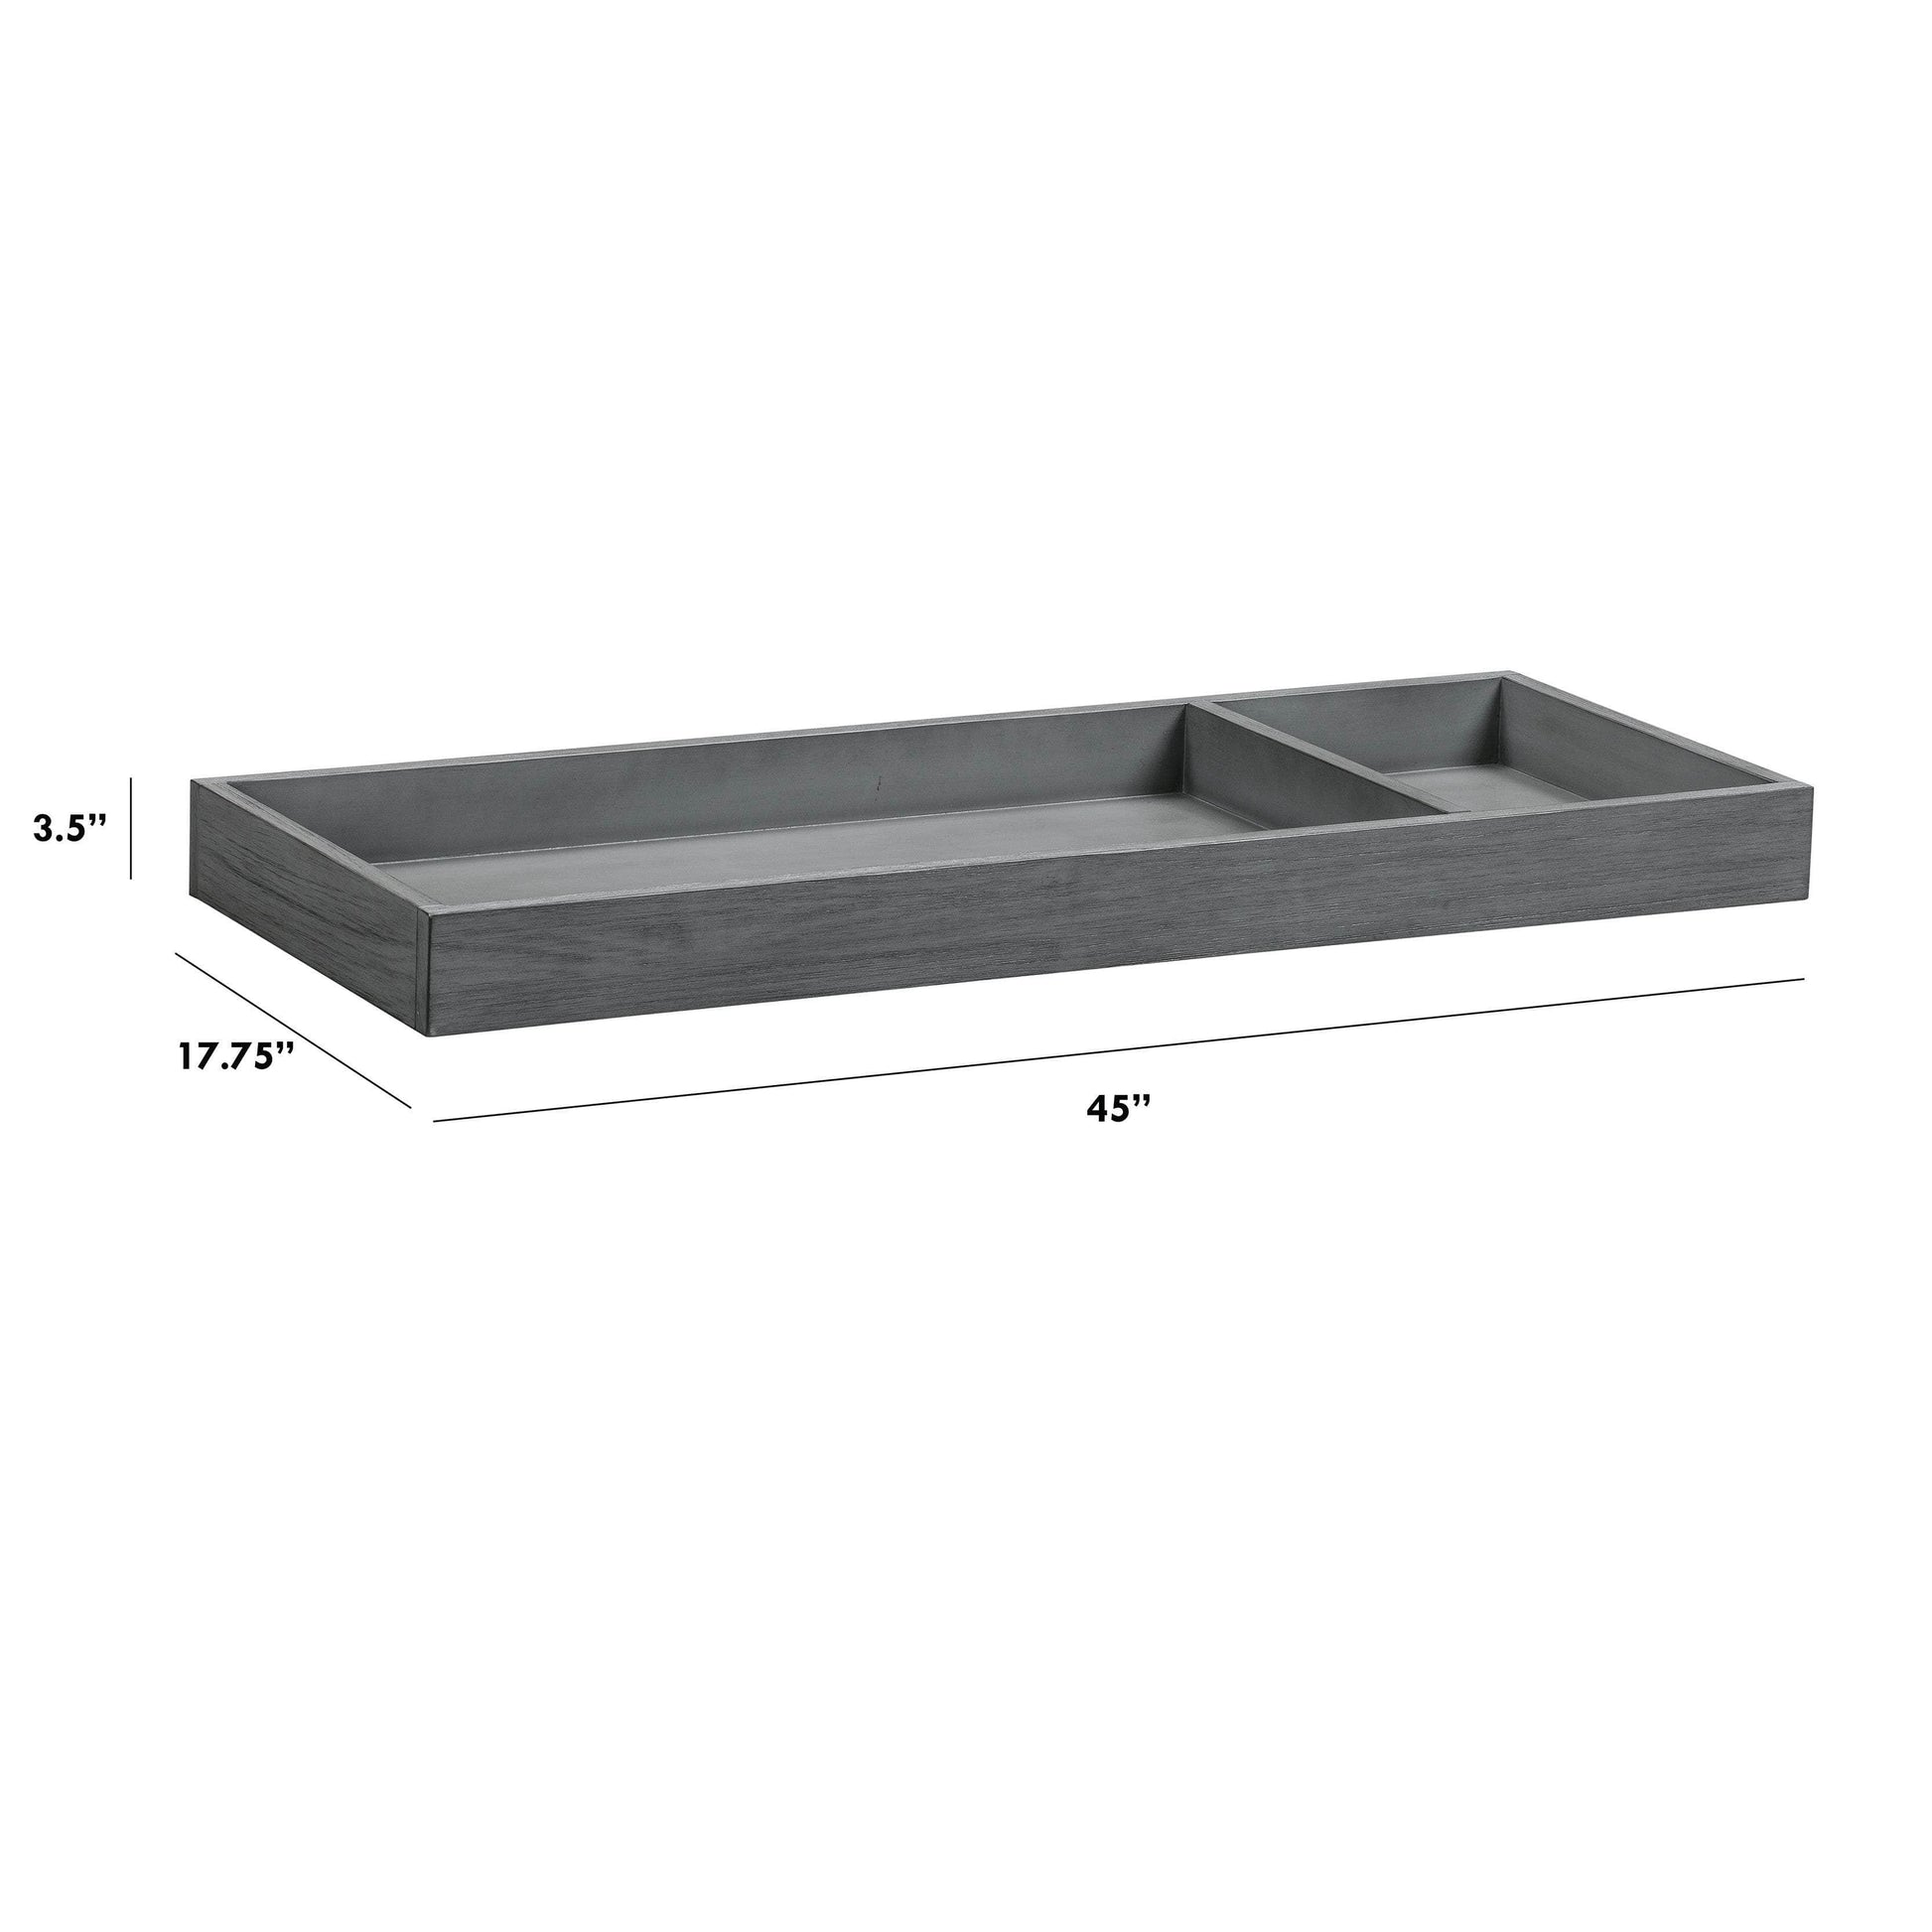 M0619WC,Universal Wide Removable Changing Tray in Weathered Charcoal